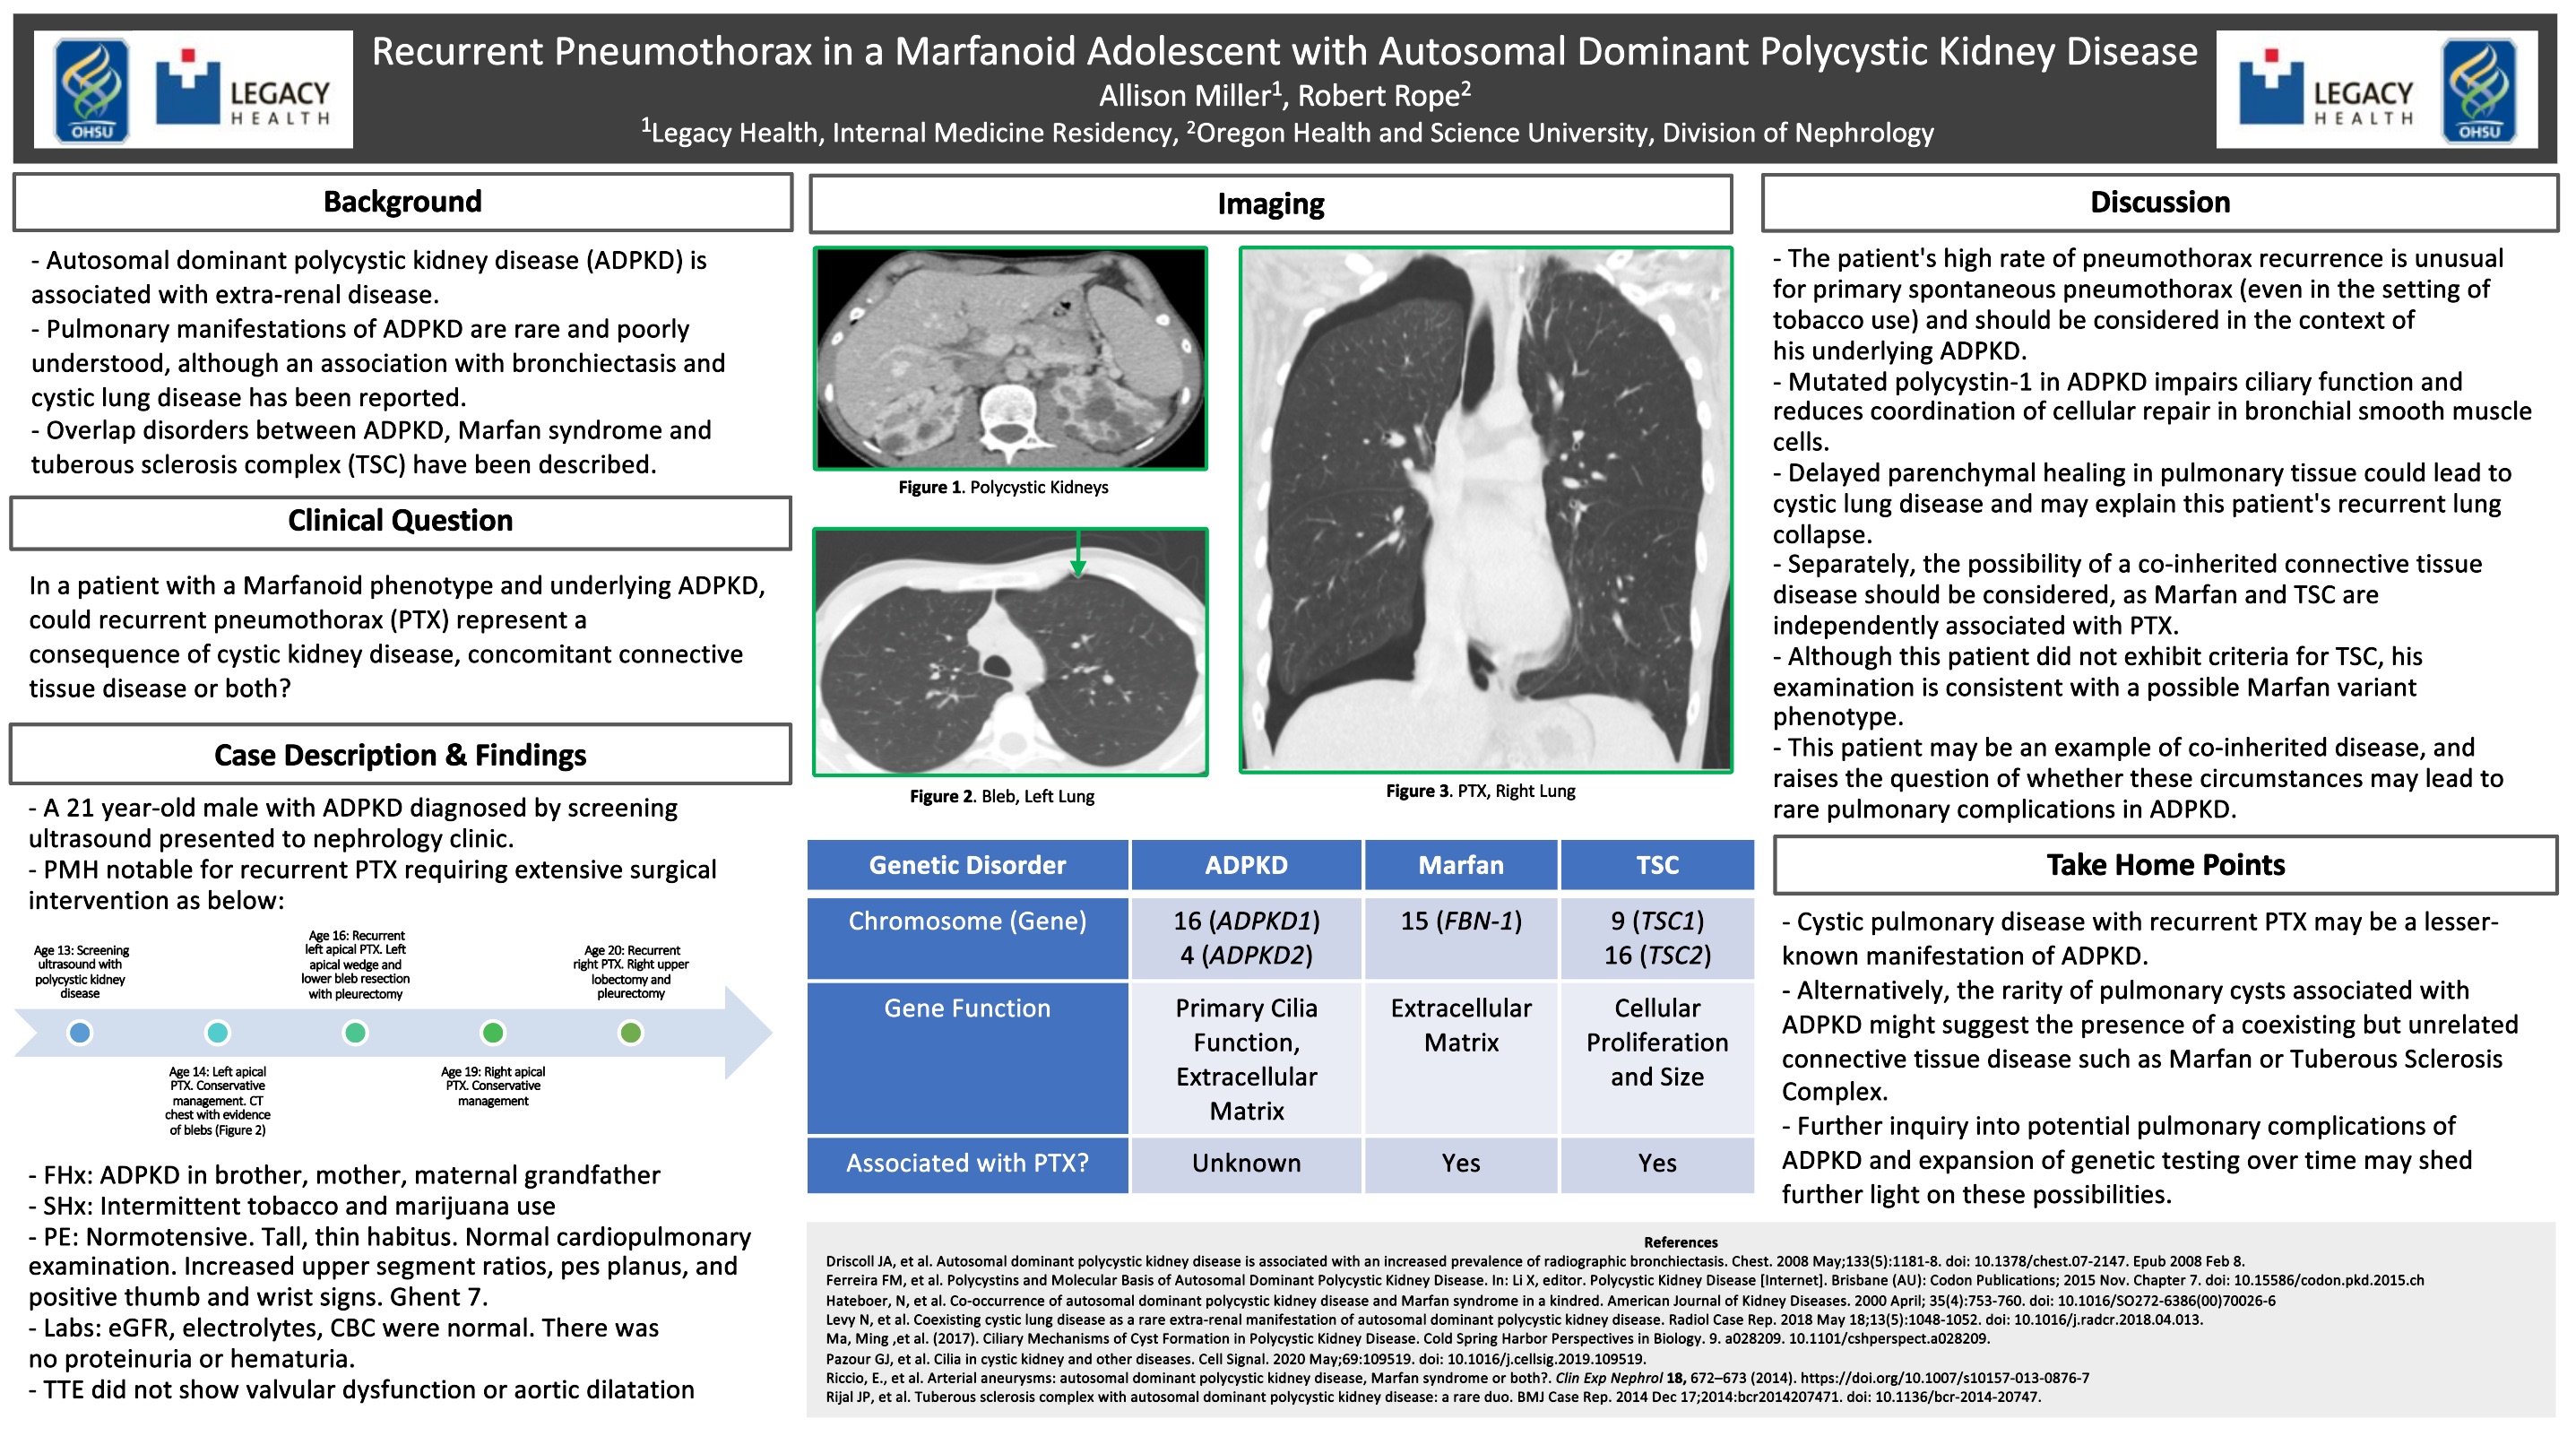 Recurrent Pneumothorax in a Marfanoid Adolescent with Autosomal Dominant Polycystic Kidney Disease